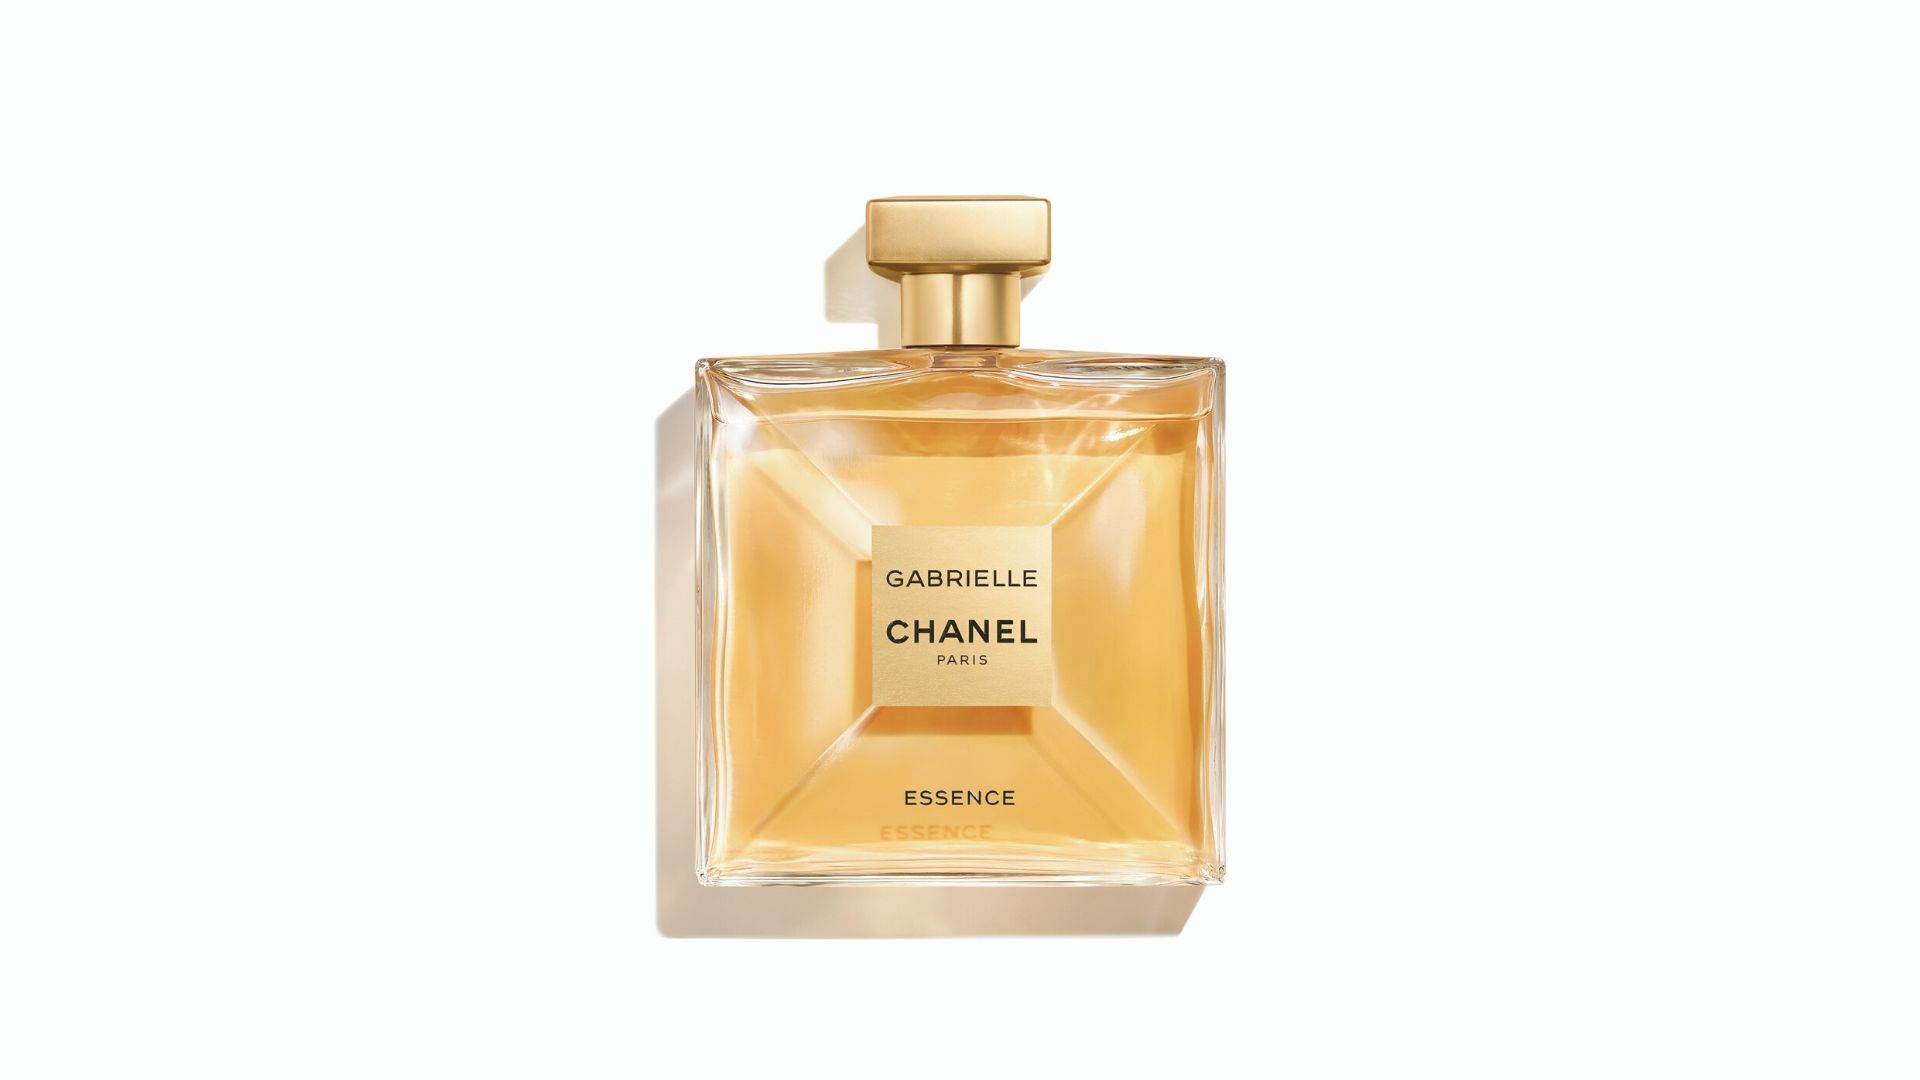 Chanel Reinvents Their Cult Classic Gabrielle Chanel Perfume